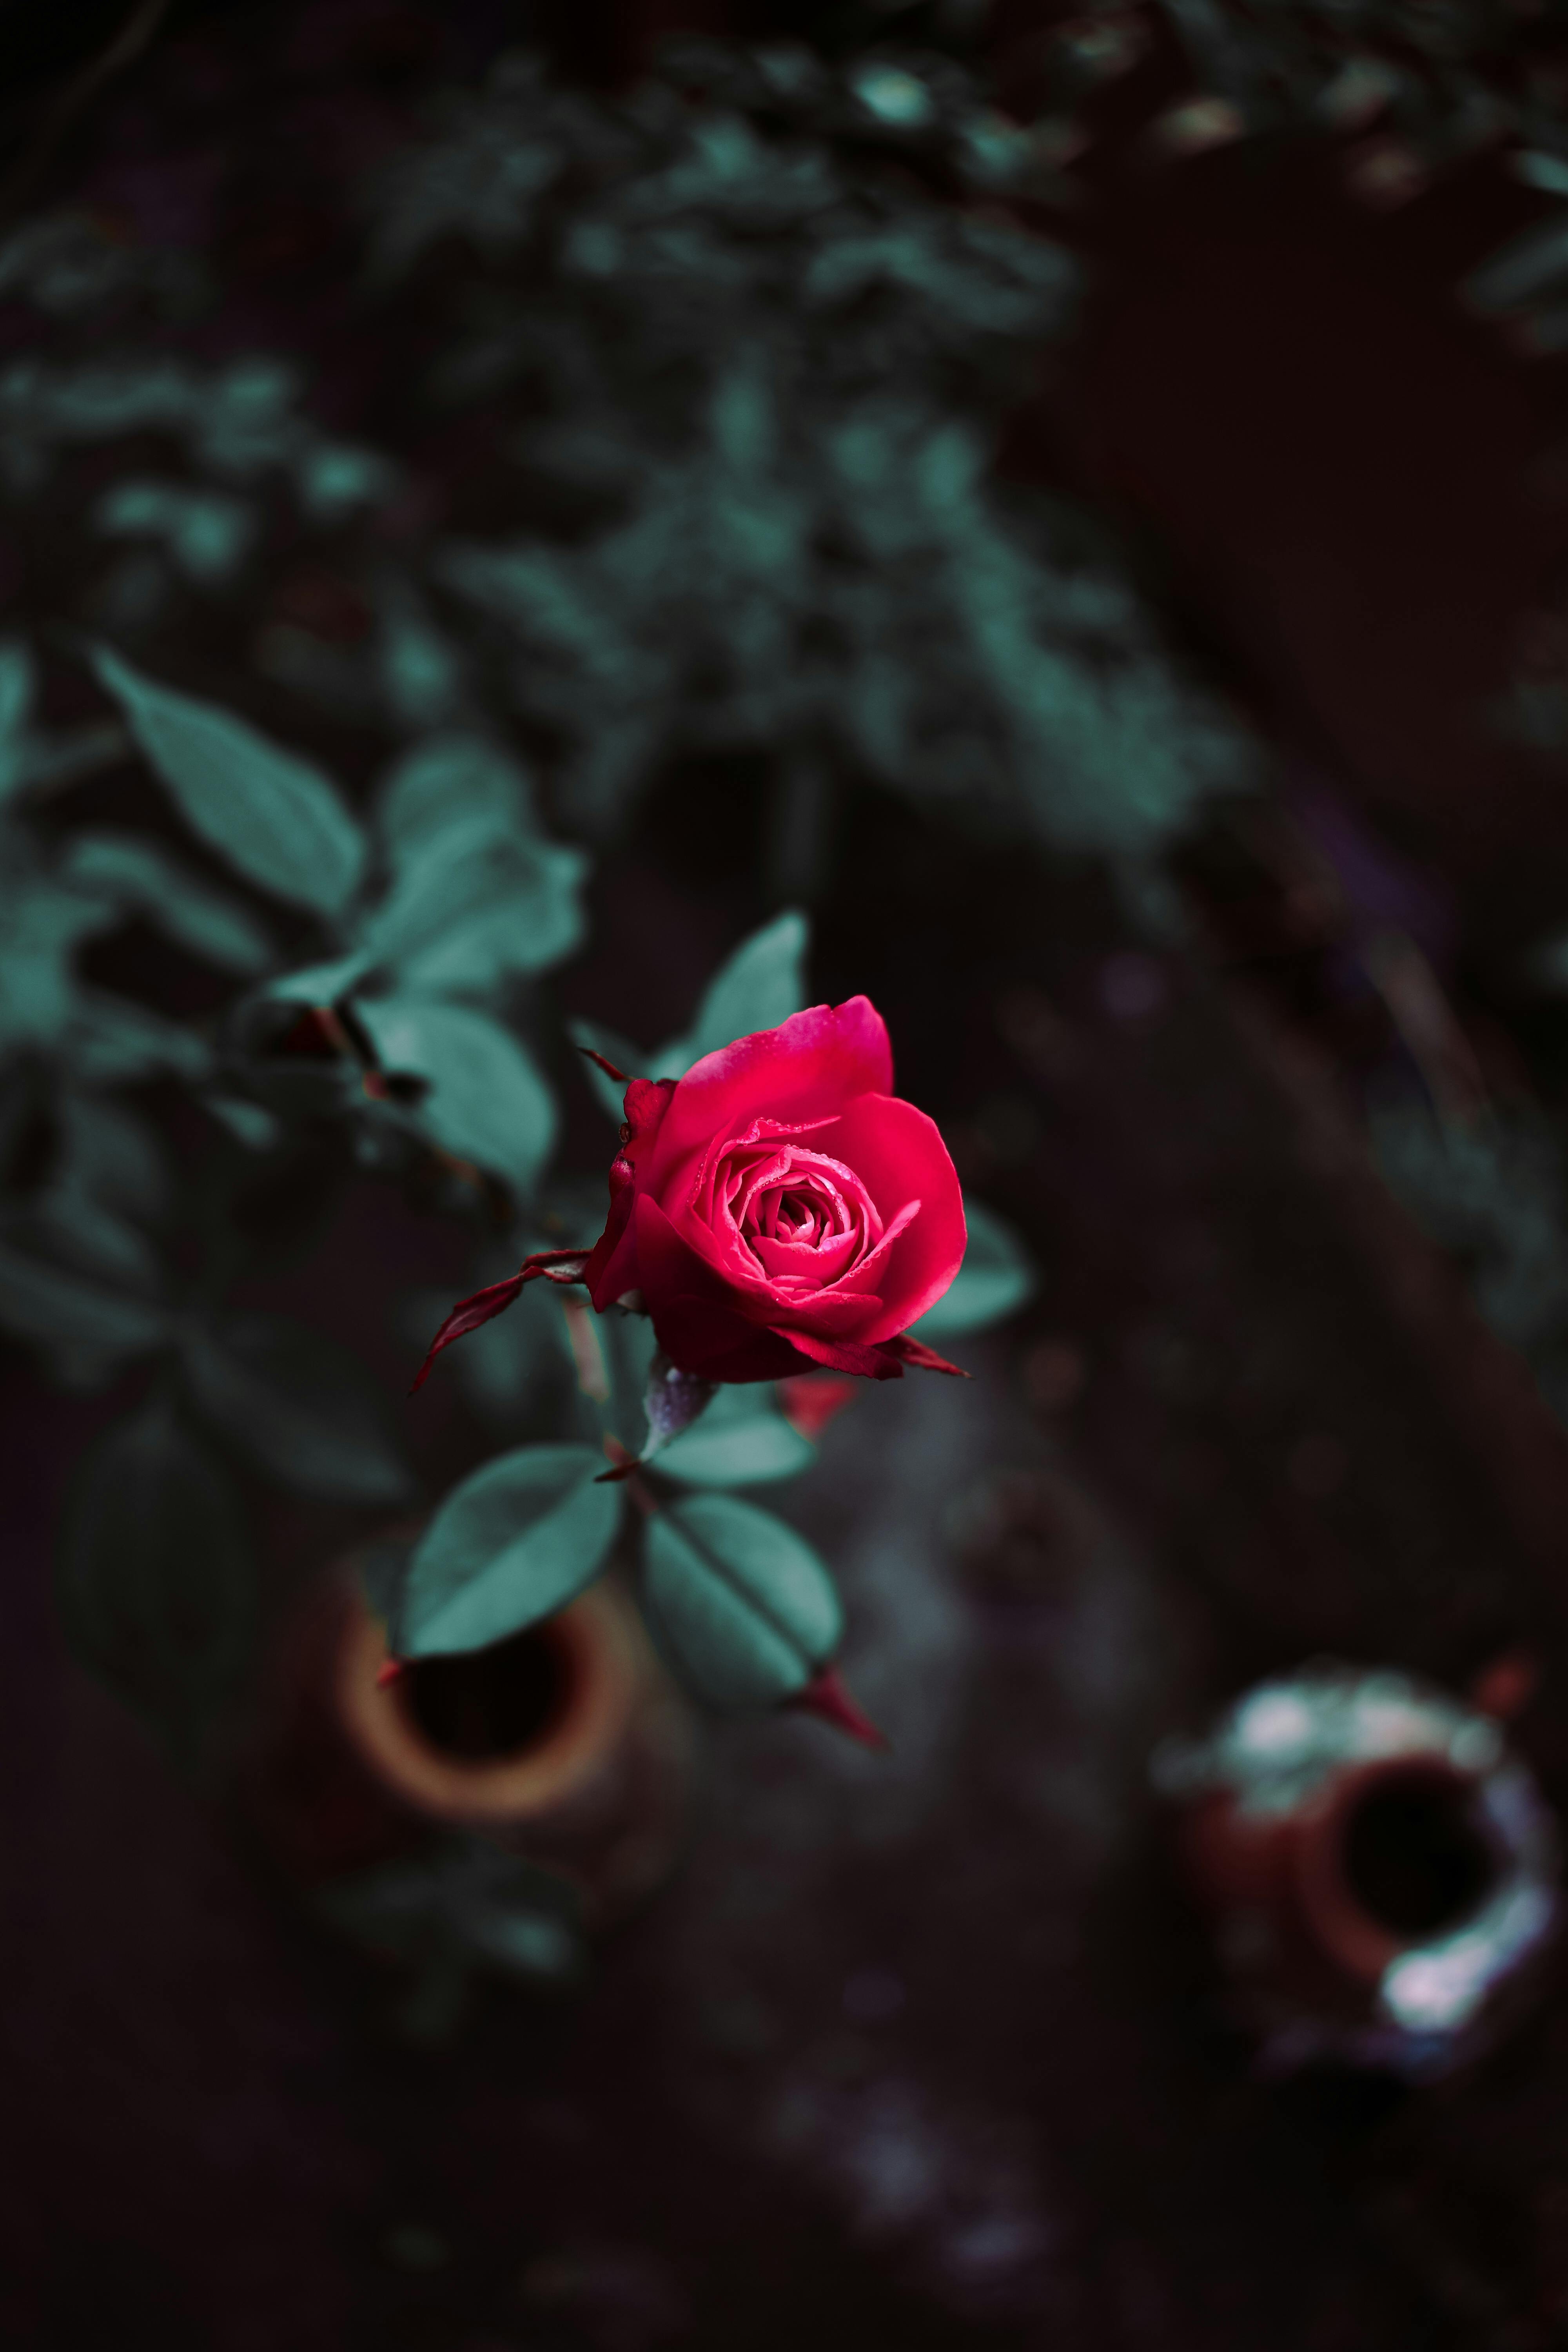 Red Flowers In The Middle Of The Image With A Black Background Stock Photo  - Download Image Now - iStock